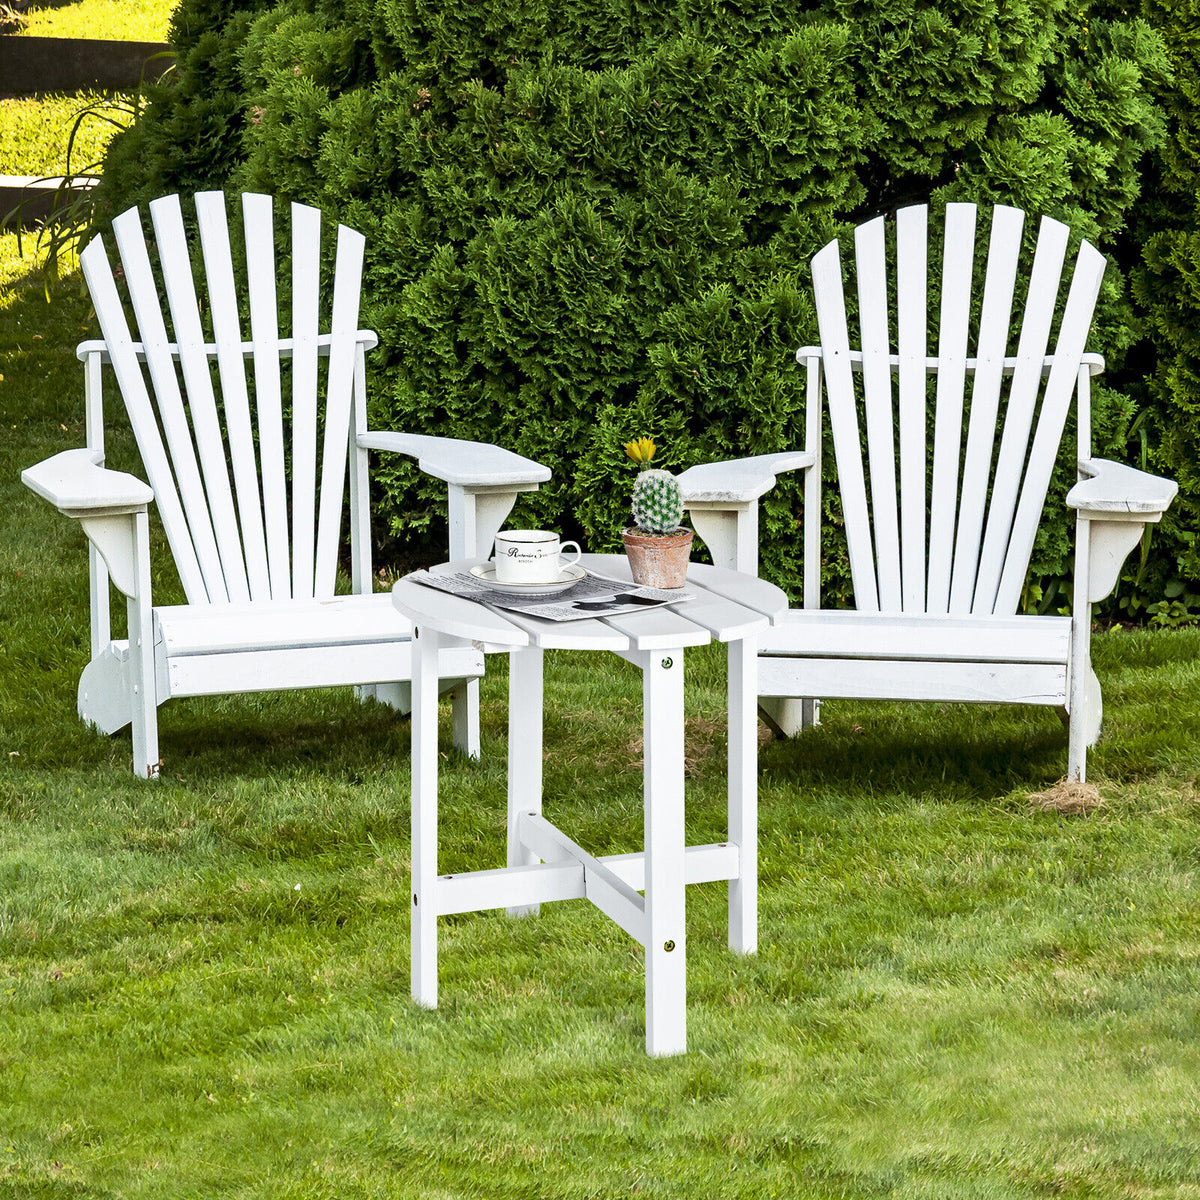 18-Inch Round Wooden Slat Patio Side Table in White for Garden Deck